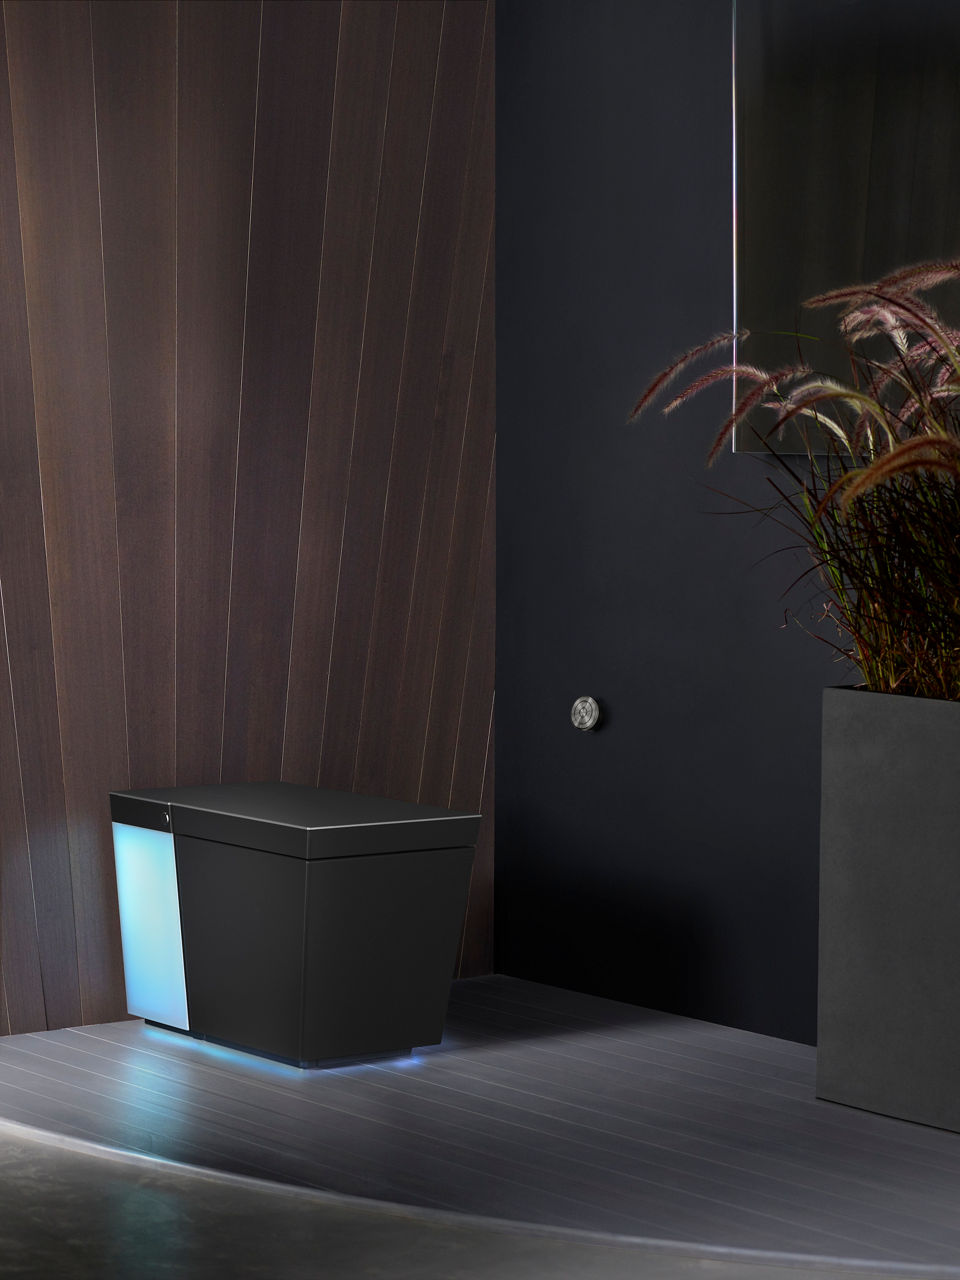 An illuminated Numi 2.0 toilet in a bathroom with gray floors, and brown wood and black painted walls.